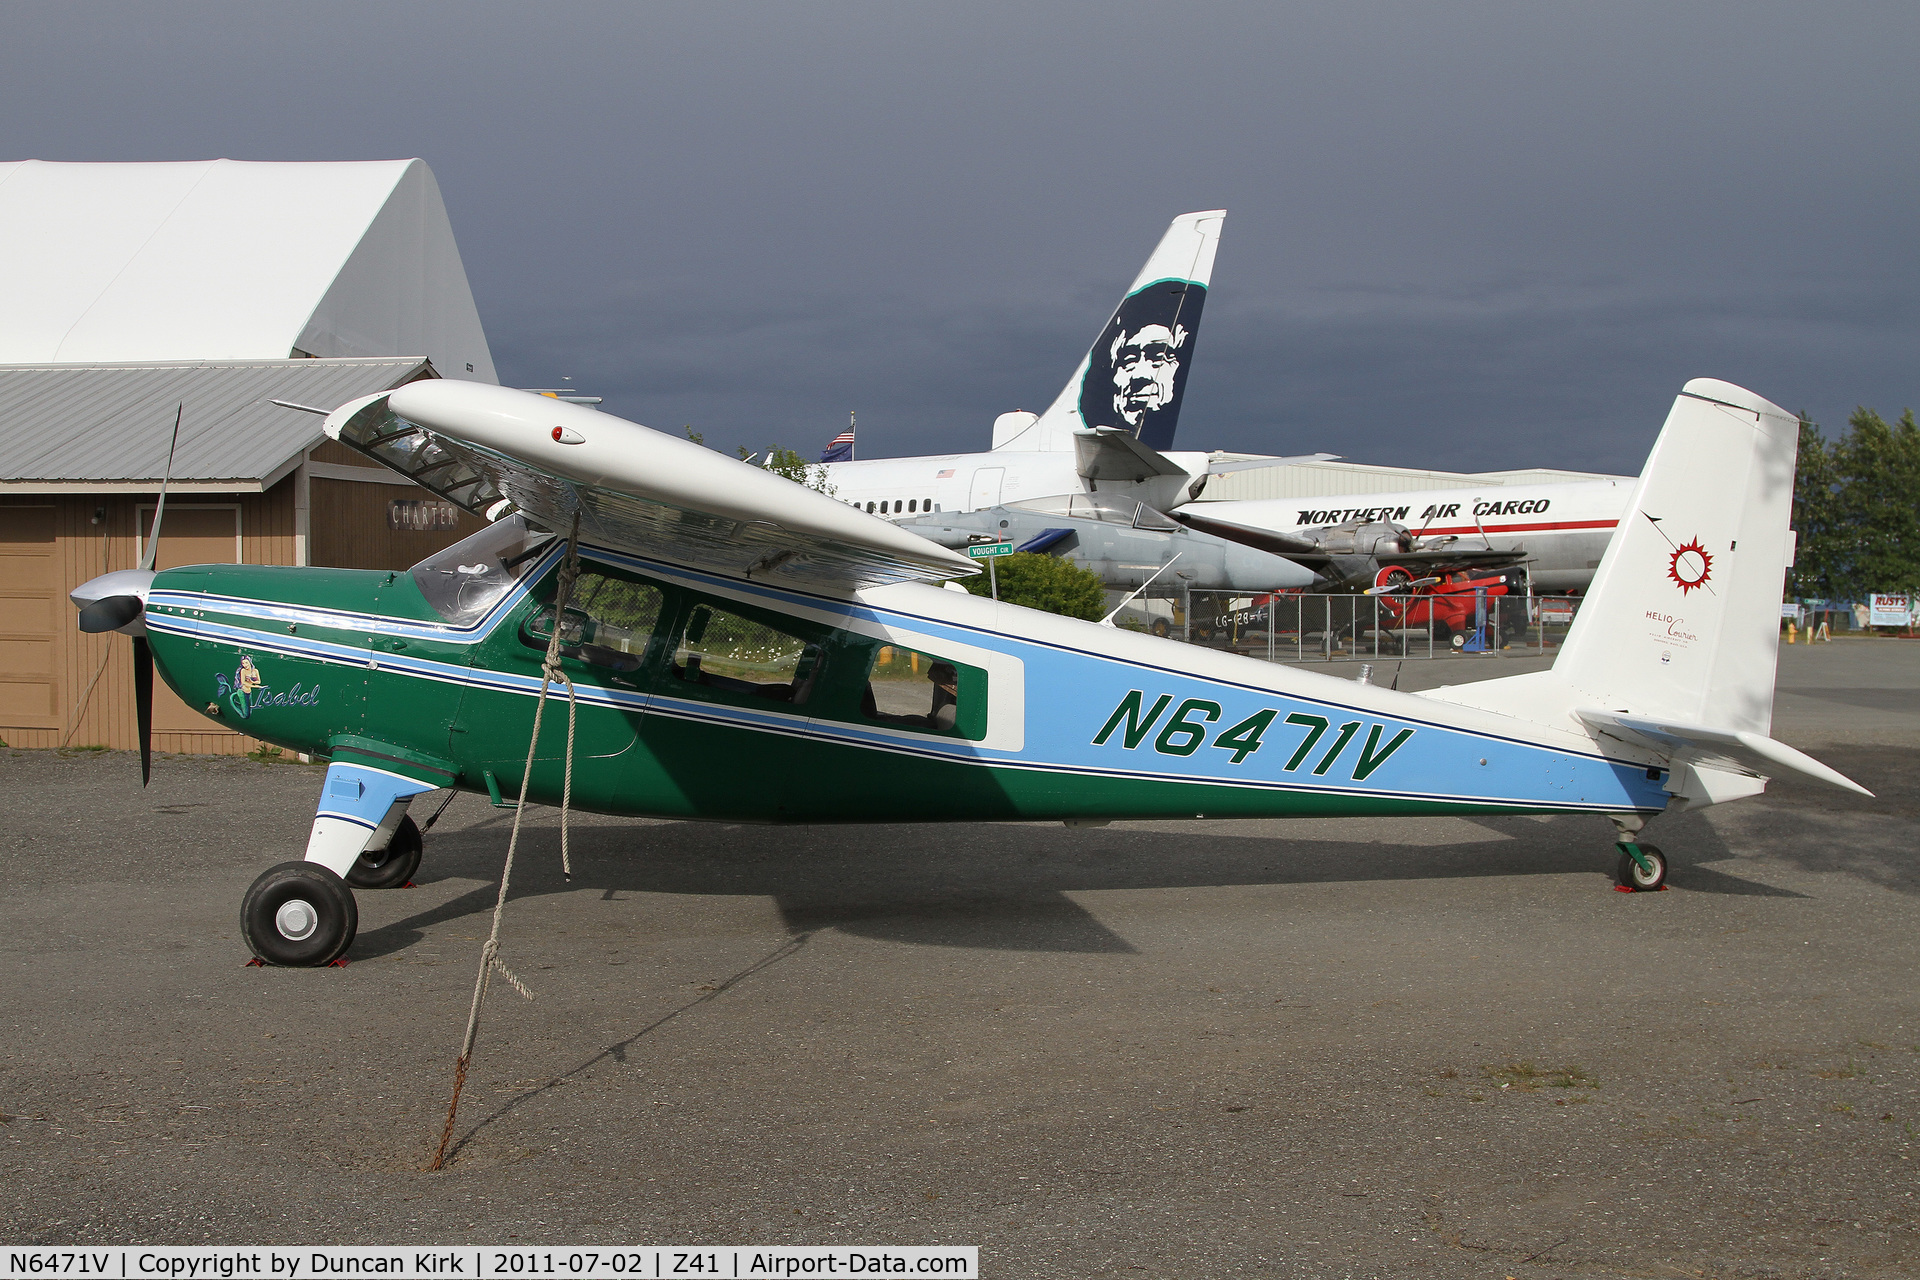 N6471V, 1970 Helio H-295-1400 Super Courier C/N 1422, Based at Monroe, WA down the road from me!